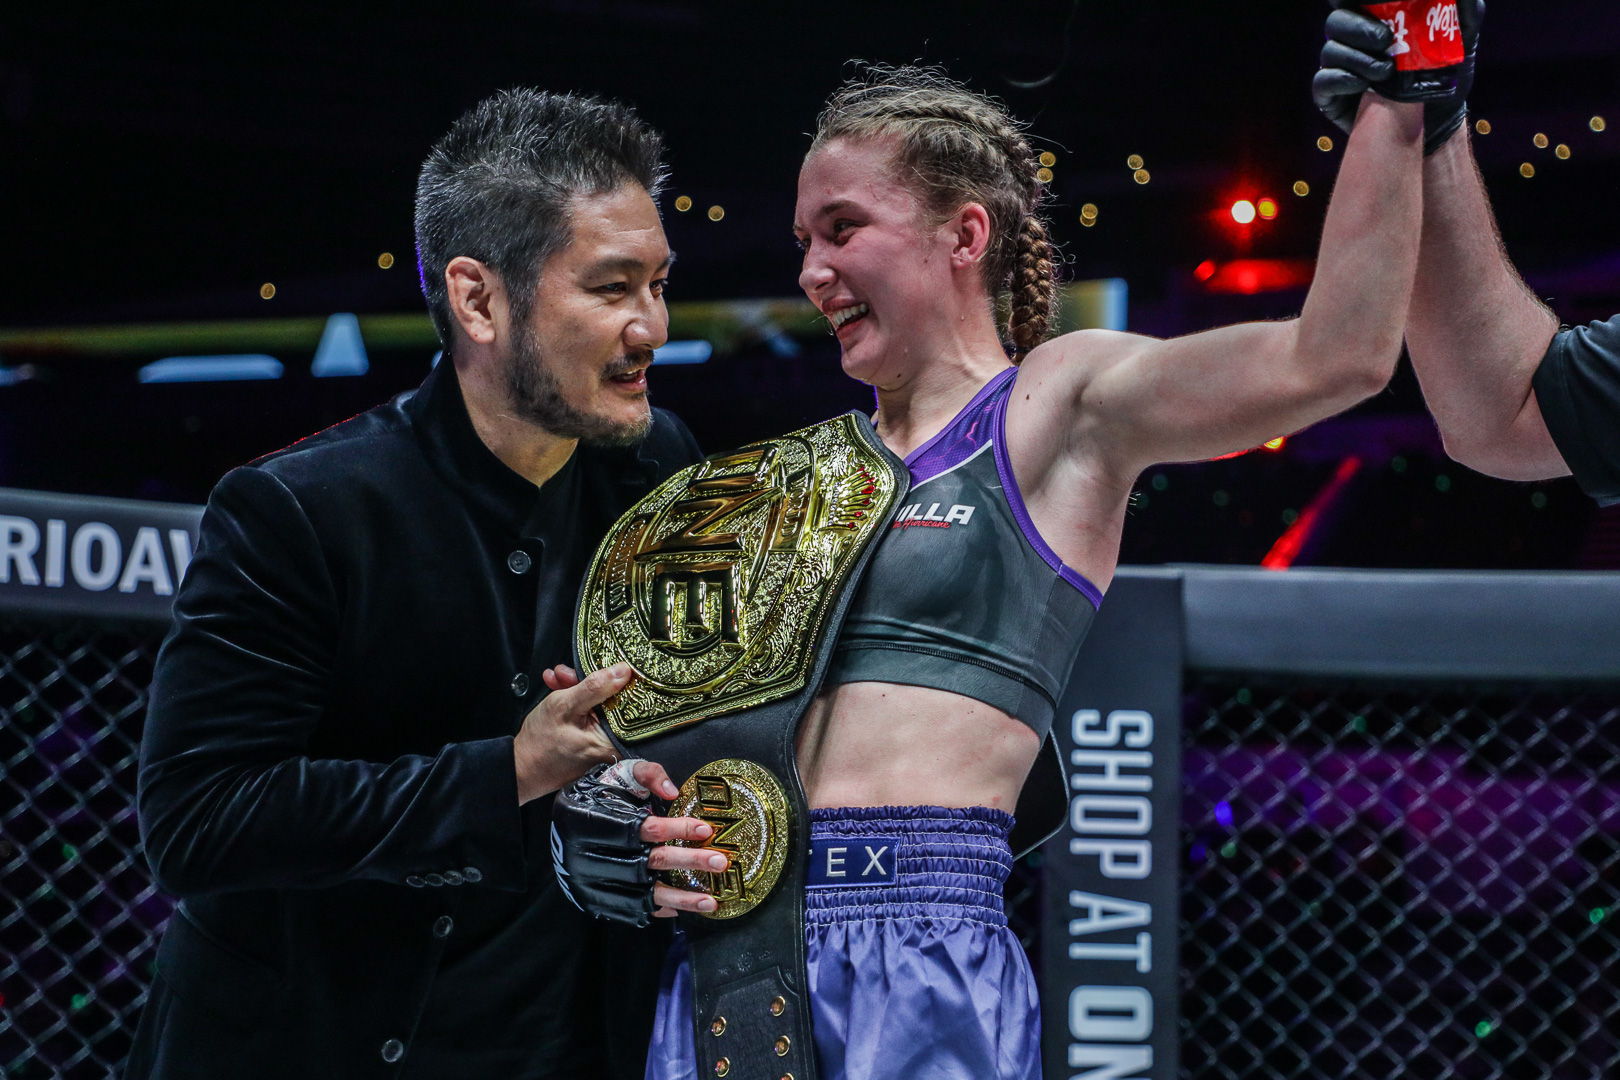 Smilla Sundell wins the inaugural ONE Women's Strawweight Muay Thai World Championship at ONE 156